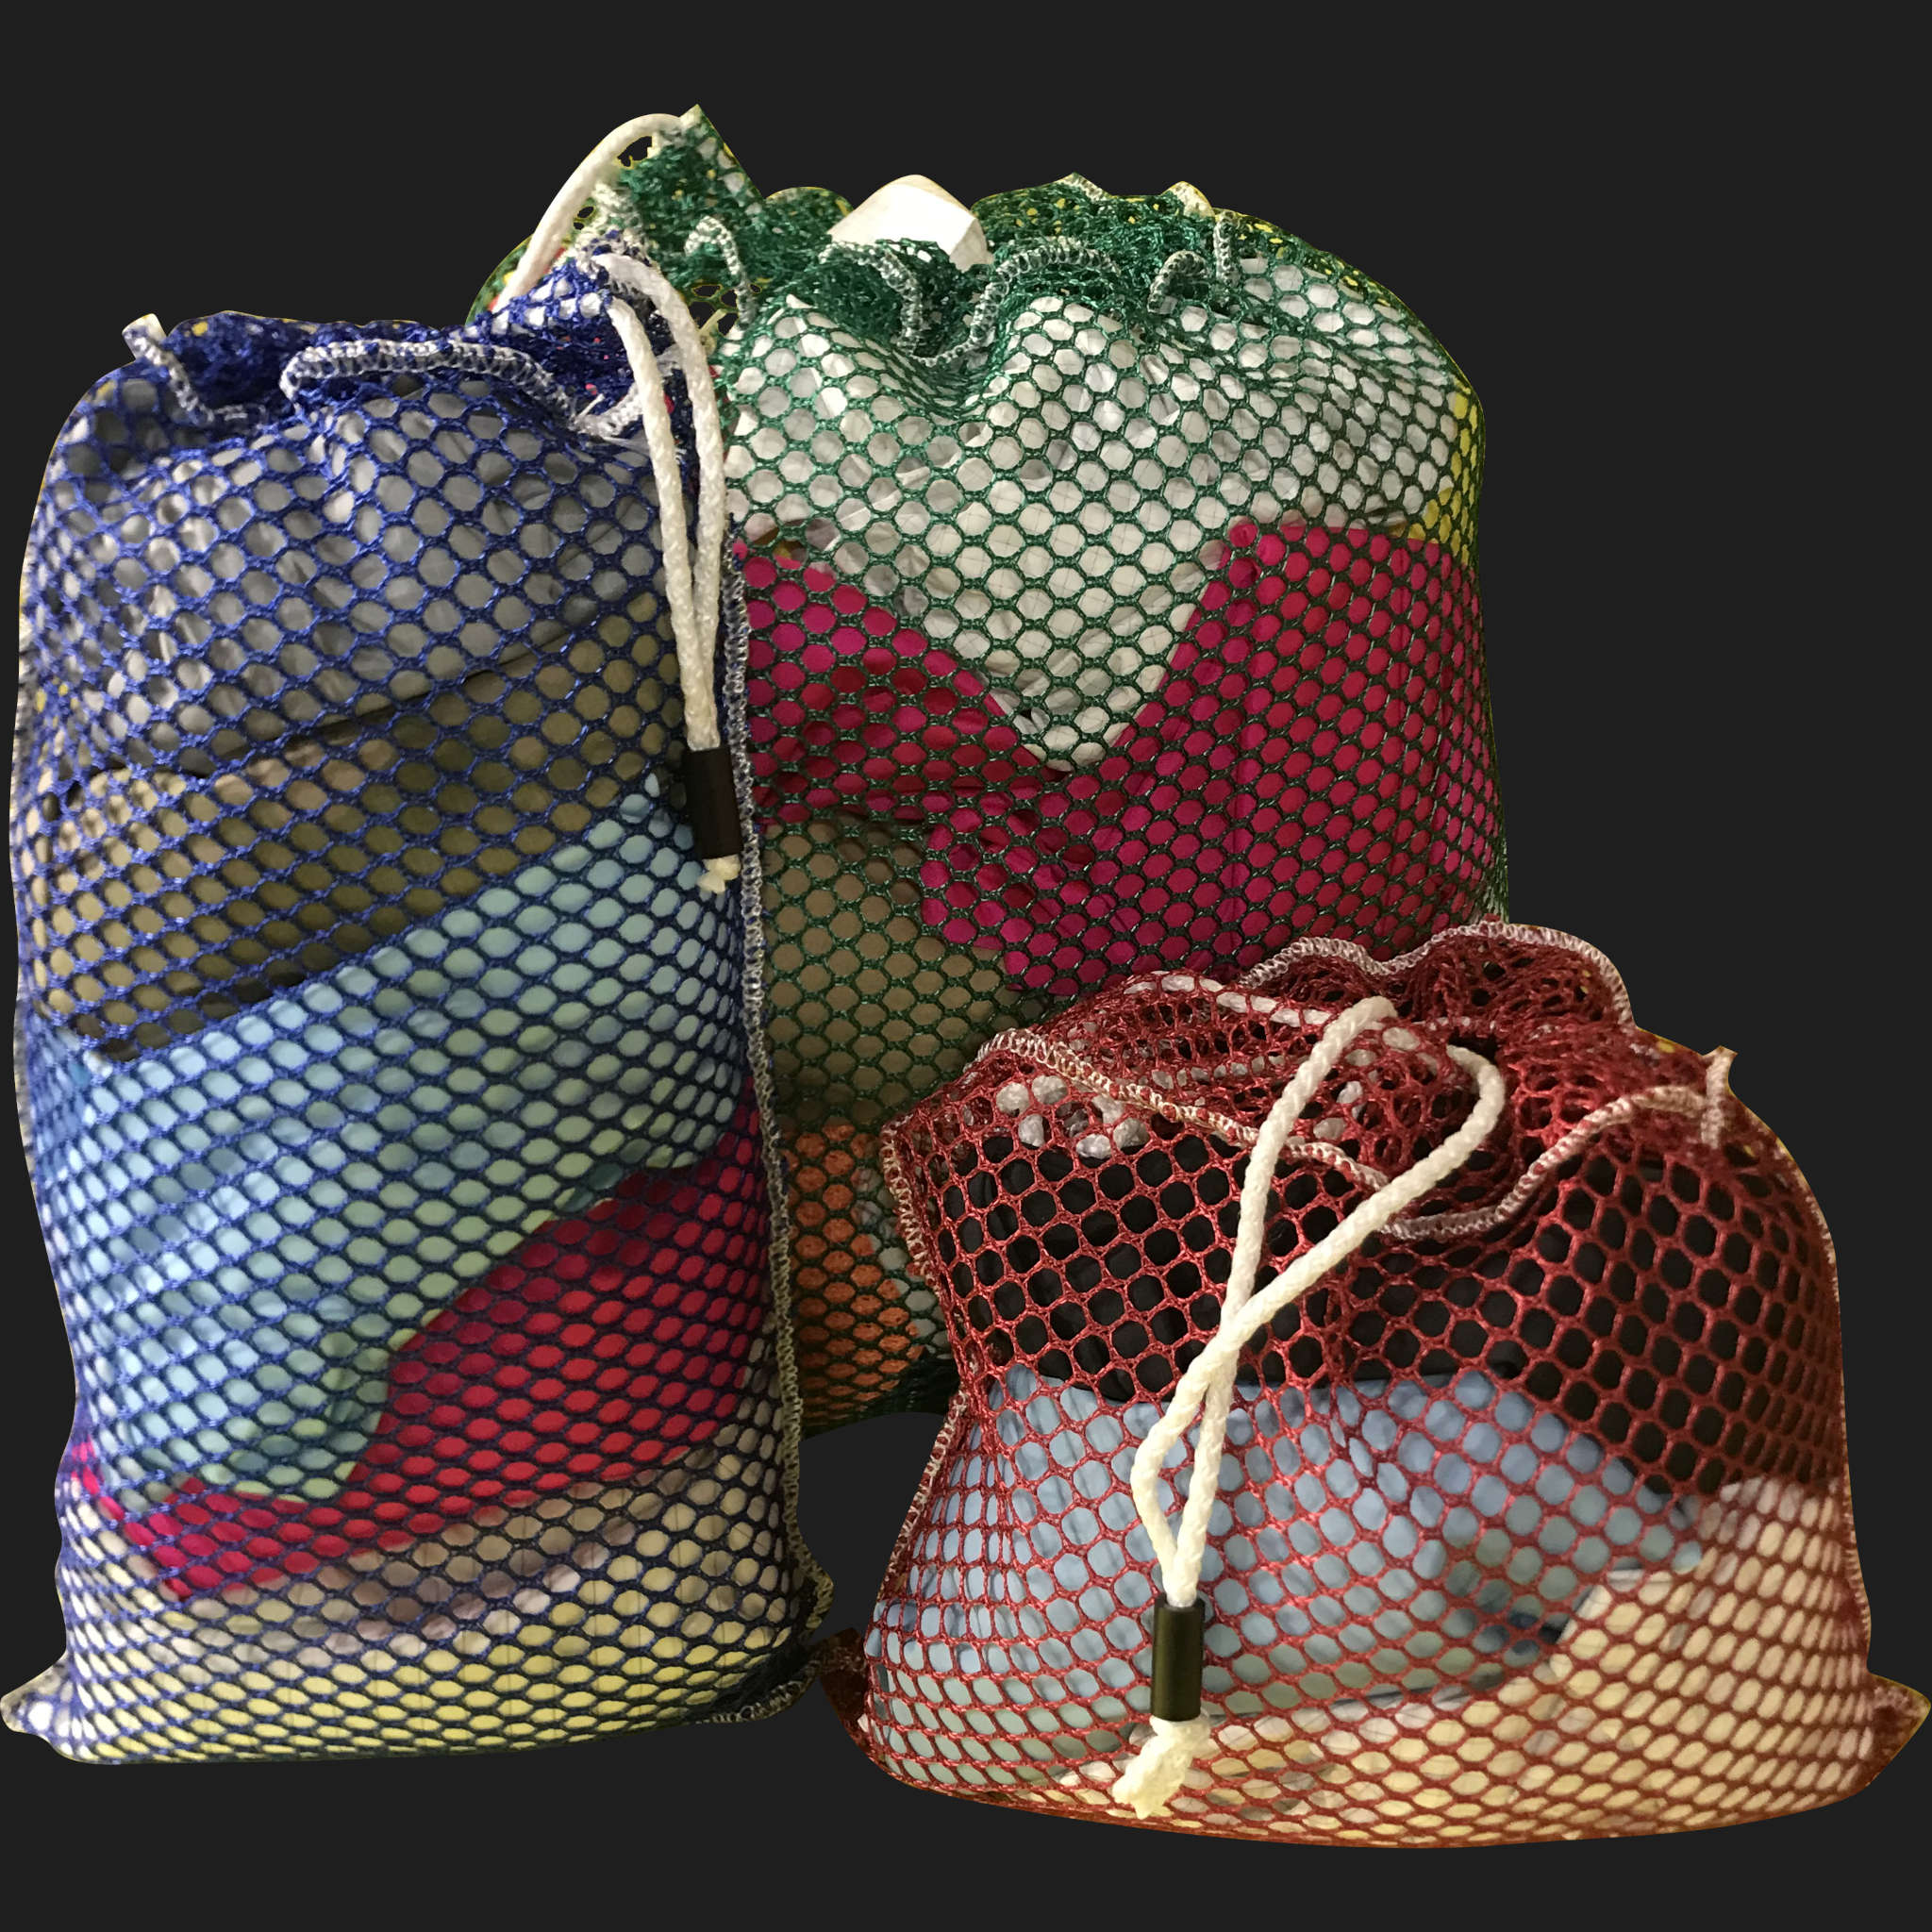 20" x 30" Customized Mesh-Net-Laundry Bags Heavy Duty with Cord and barrellock closure